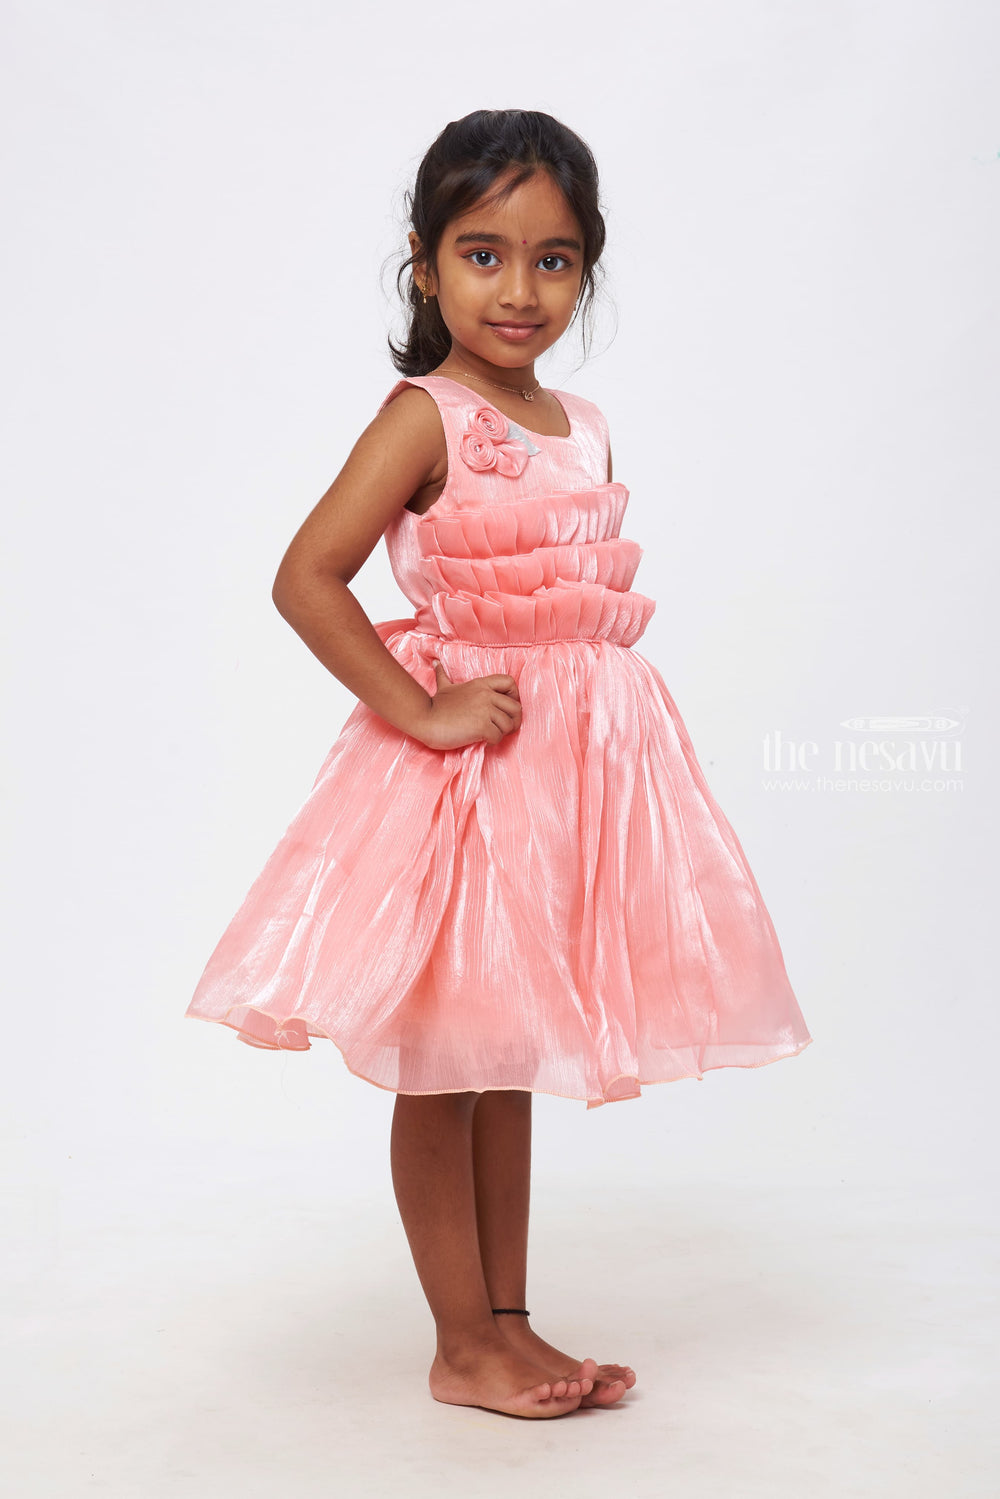 The Nesavu Girls Fancy Party Frock Blush Blossom: Girls Pink Tulle Frock with Rosette Accents Nesavu The Perfect Twirl | Elegant Frocks for Girls' Party Nights | The Nesavu